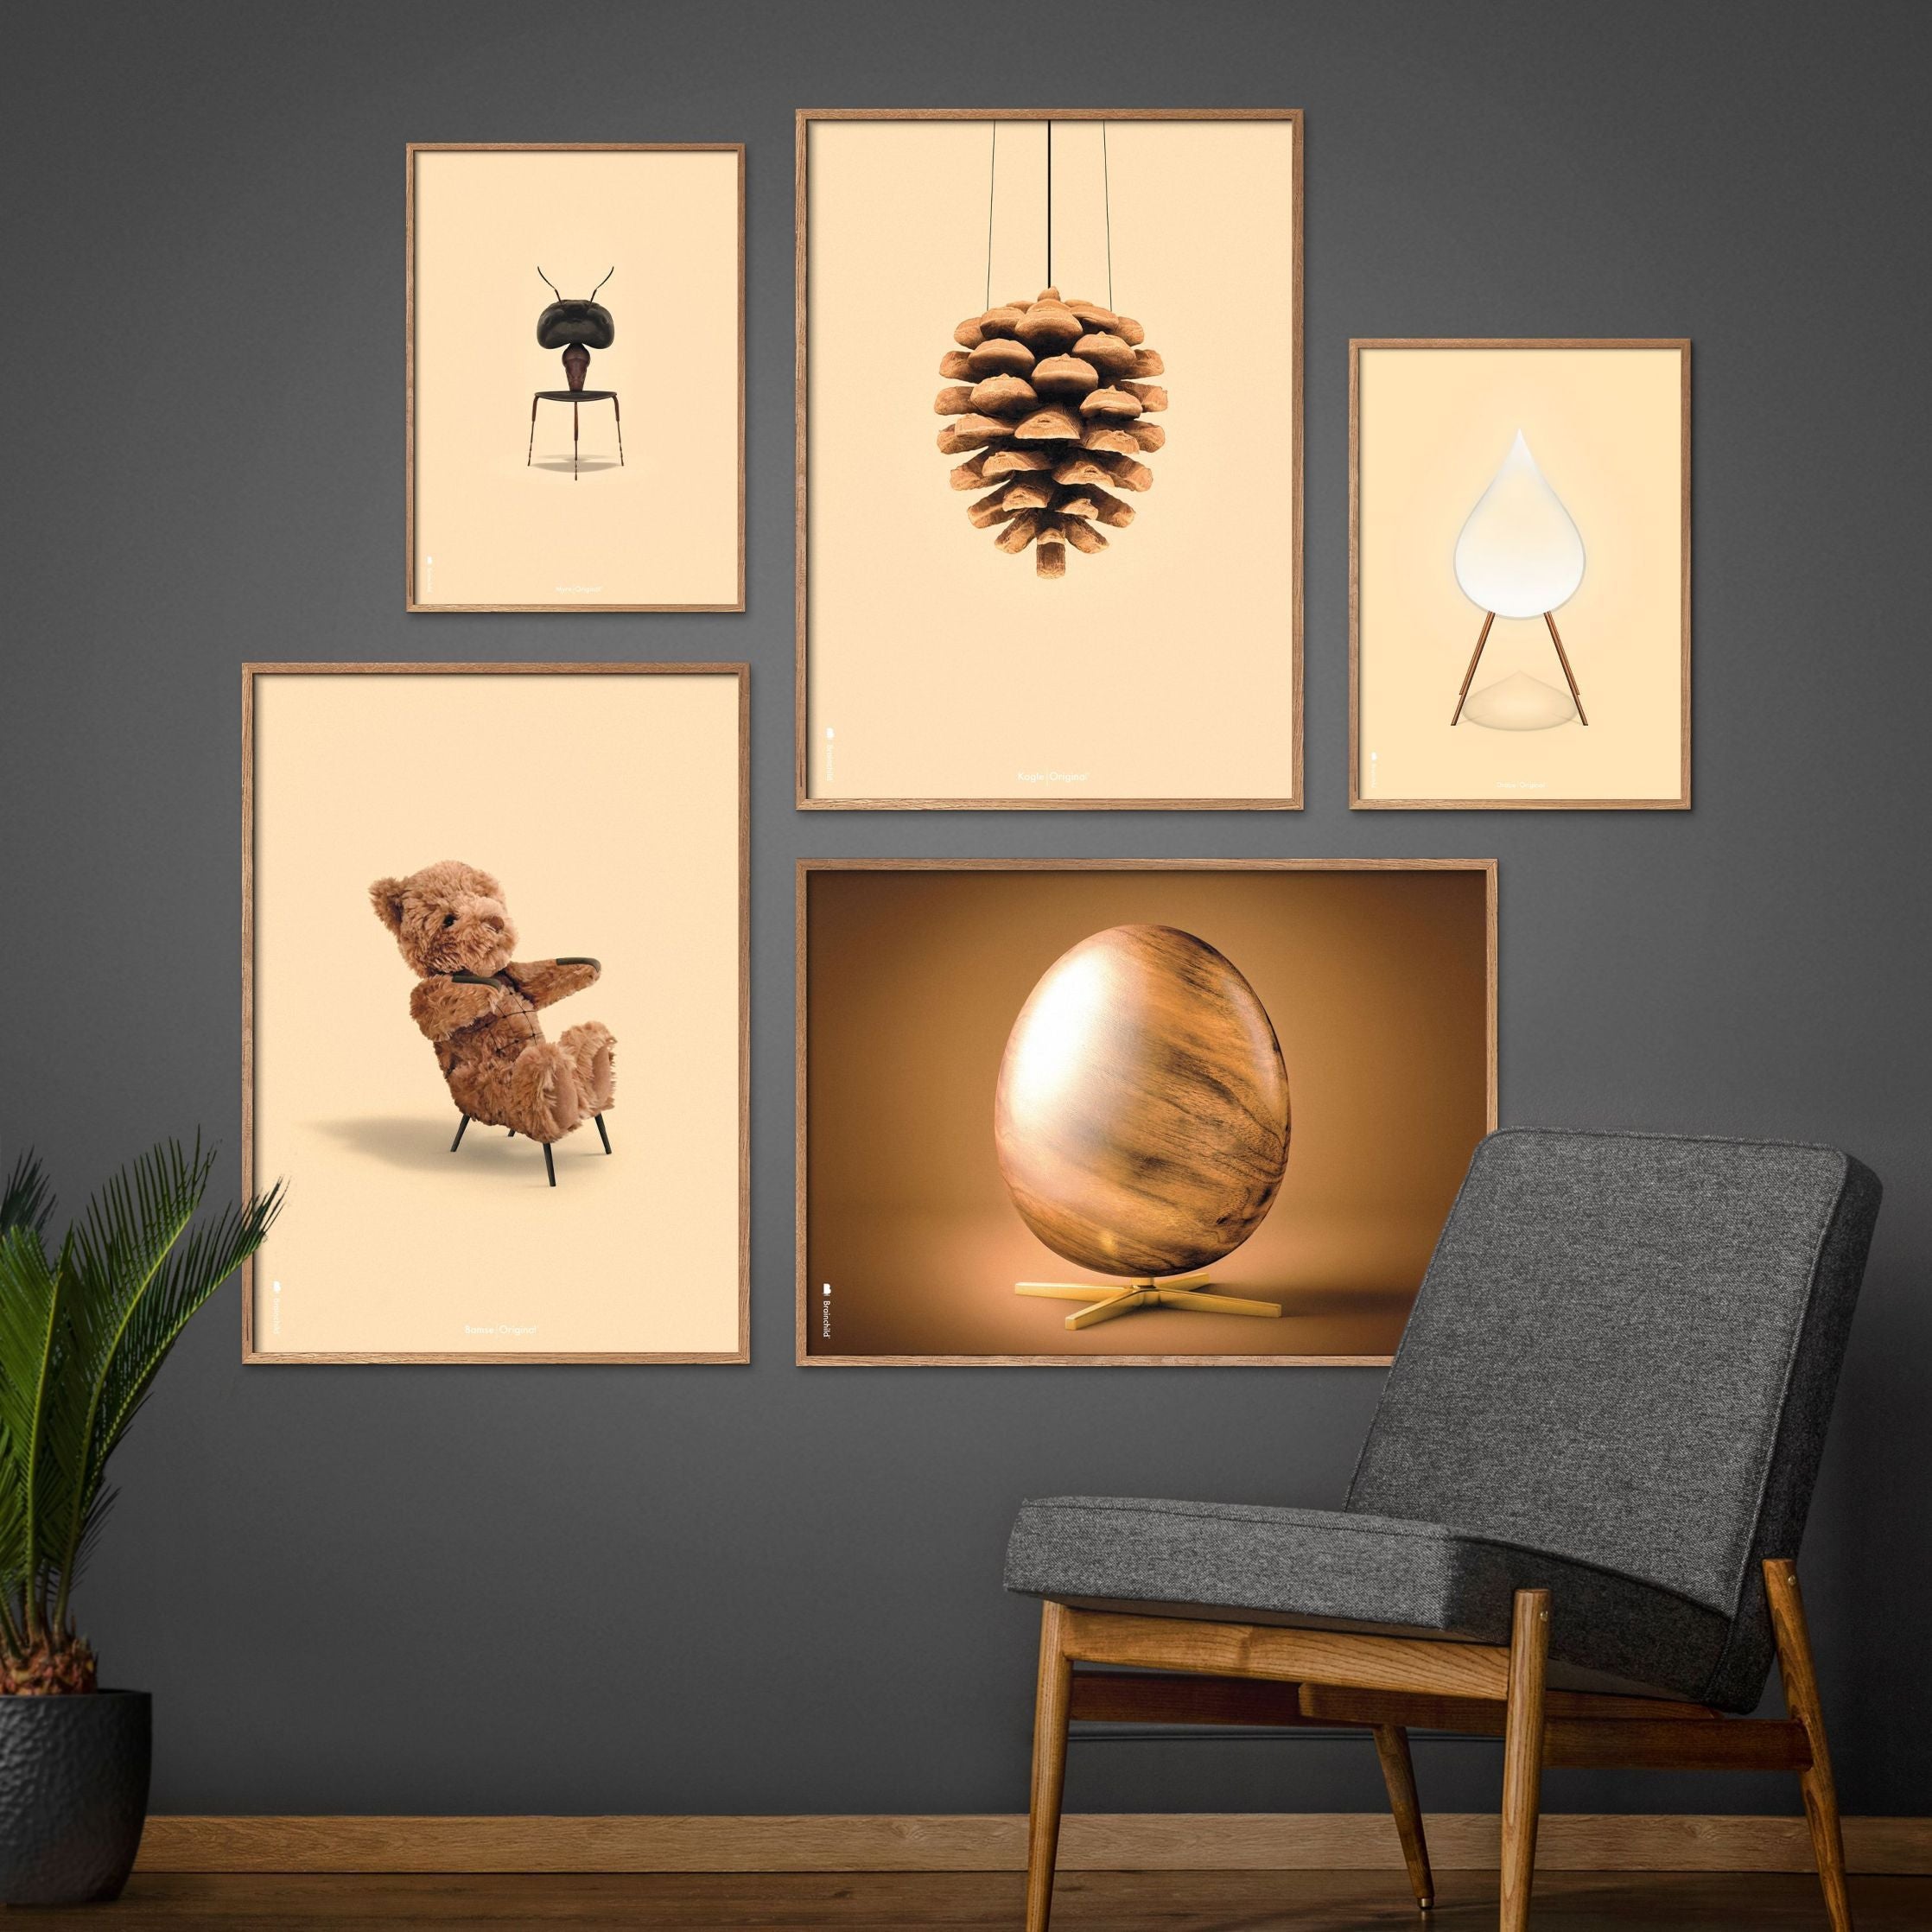 Brainchild Drop Classic Poster, Frame Made Of Light Wood 30x40 Cm, Sand Colored Background